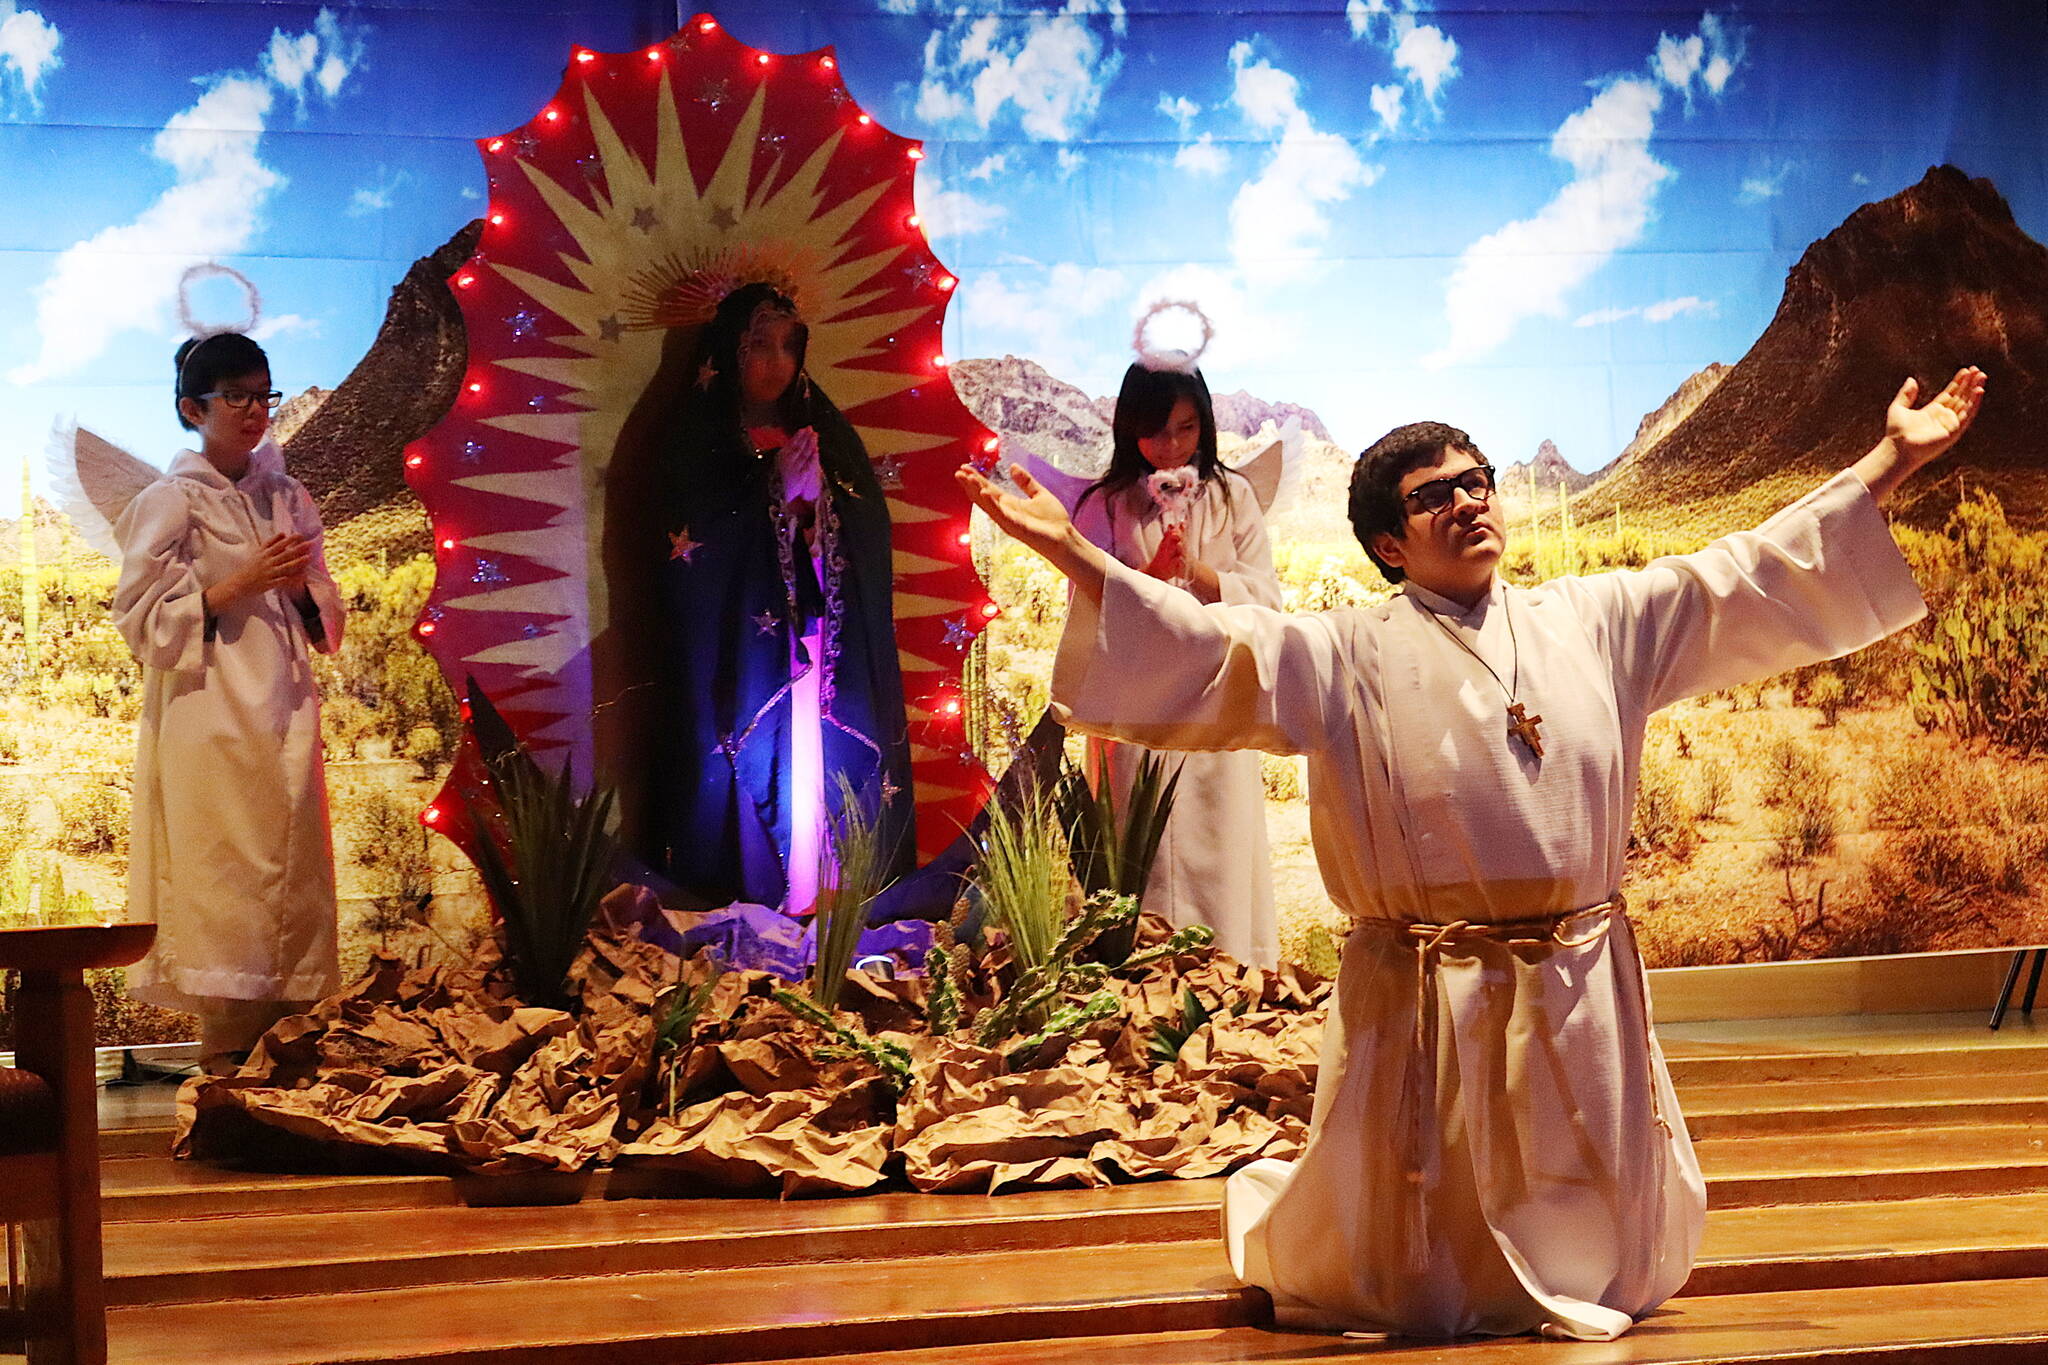 Alejandro Lamas stretches his arms as a bishop during an Our Lady of Guadalupe play on Sunday at St. Paul’s Catholic Church. In the background are Kimberly Valadez, playing the Virgin Mary, and Milagros Correa and Carlos Orozco as the angels. (Mark Sabbatini / Juneau Empire)